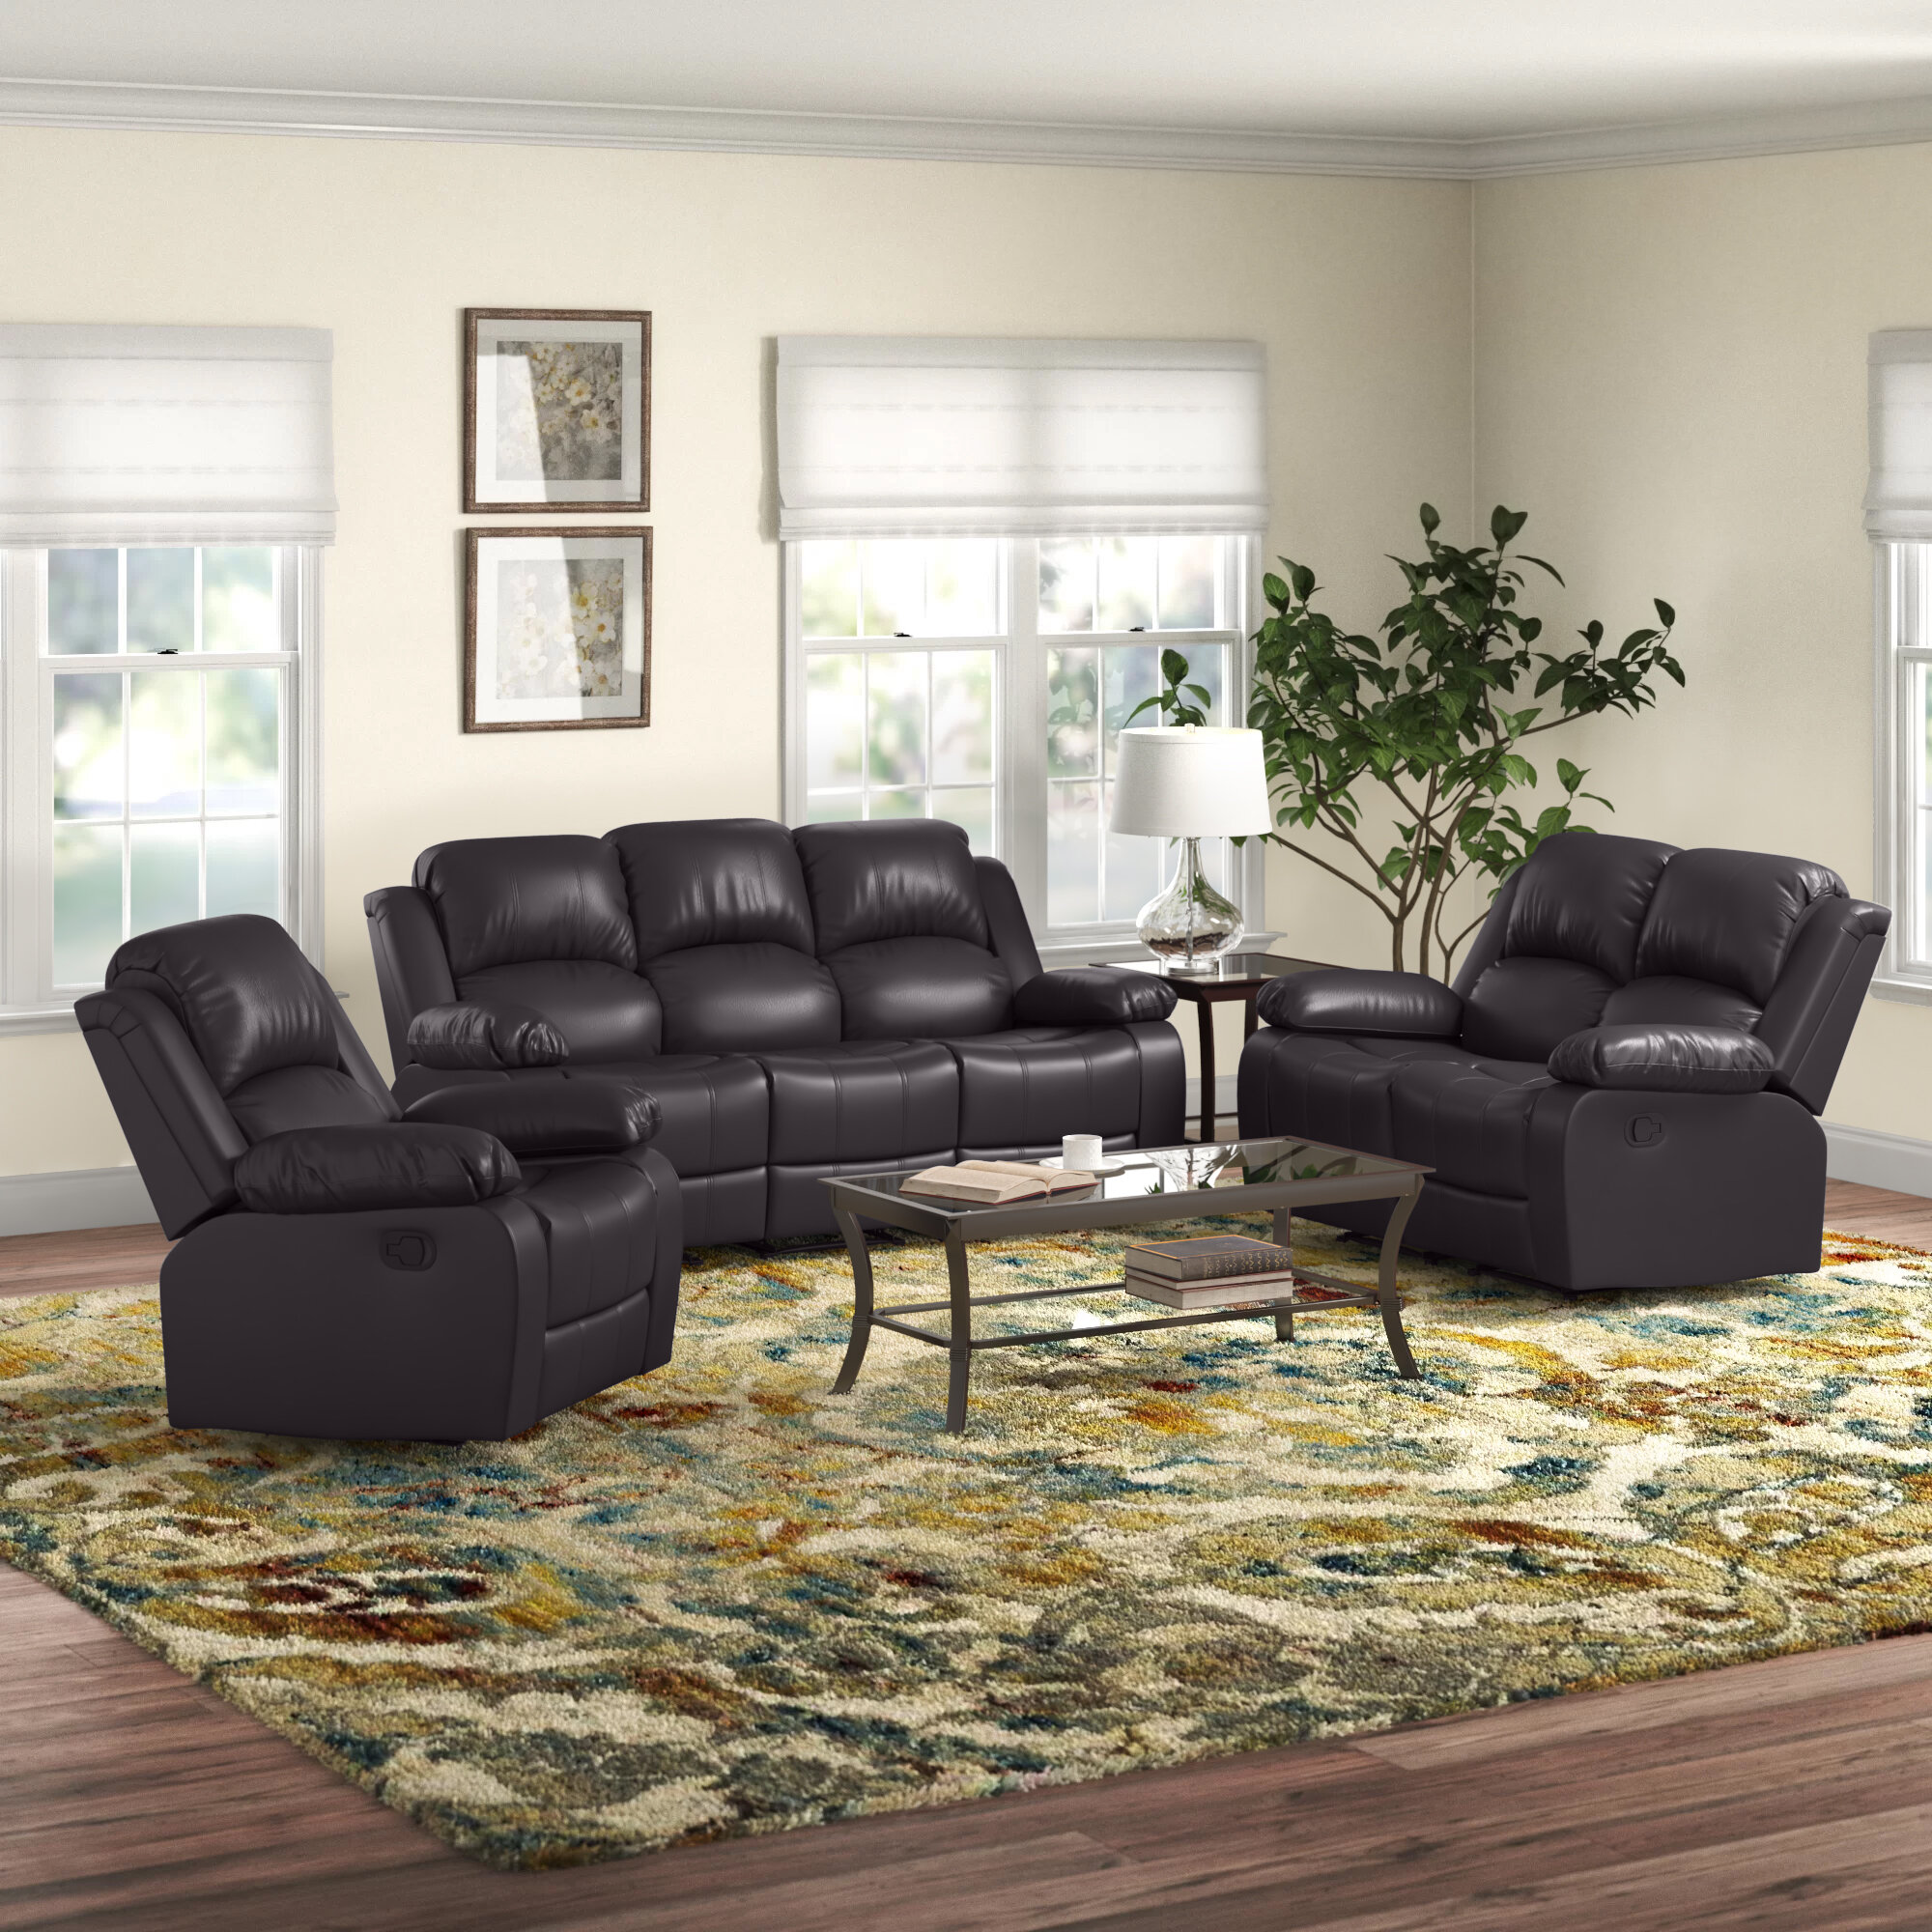 Hartranft 3 Piece Faux Leather Reclining Living Room Set